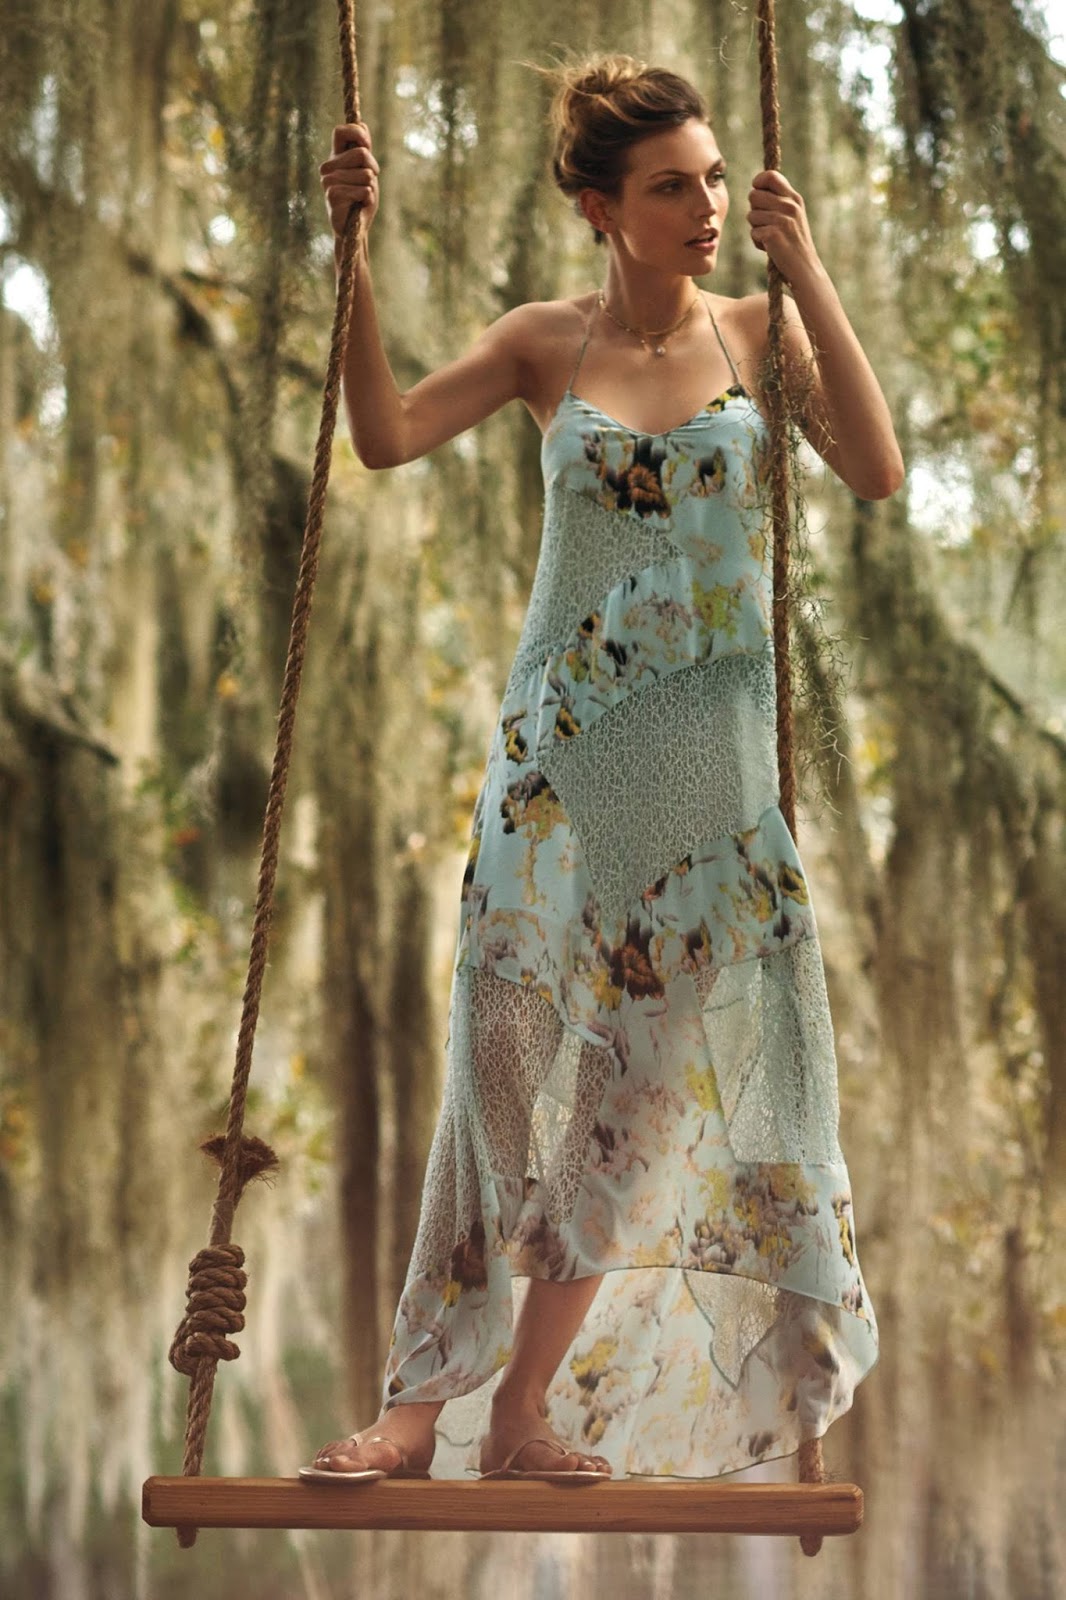 Get a super early sneak peek at Anthropologie's June new arrivals!